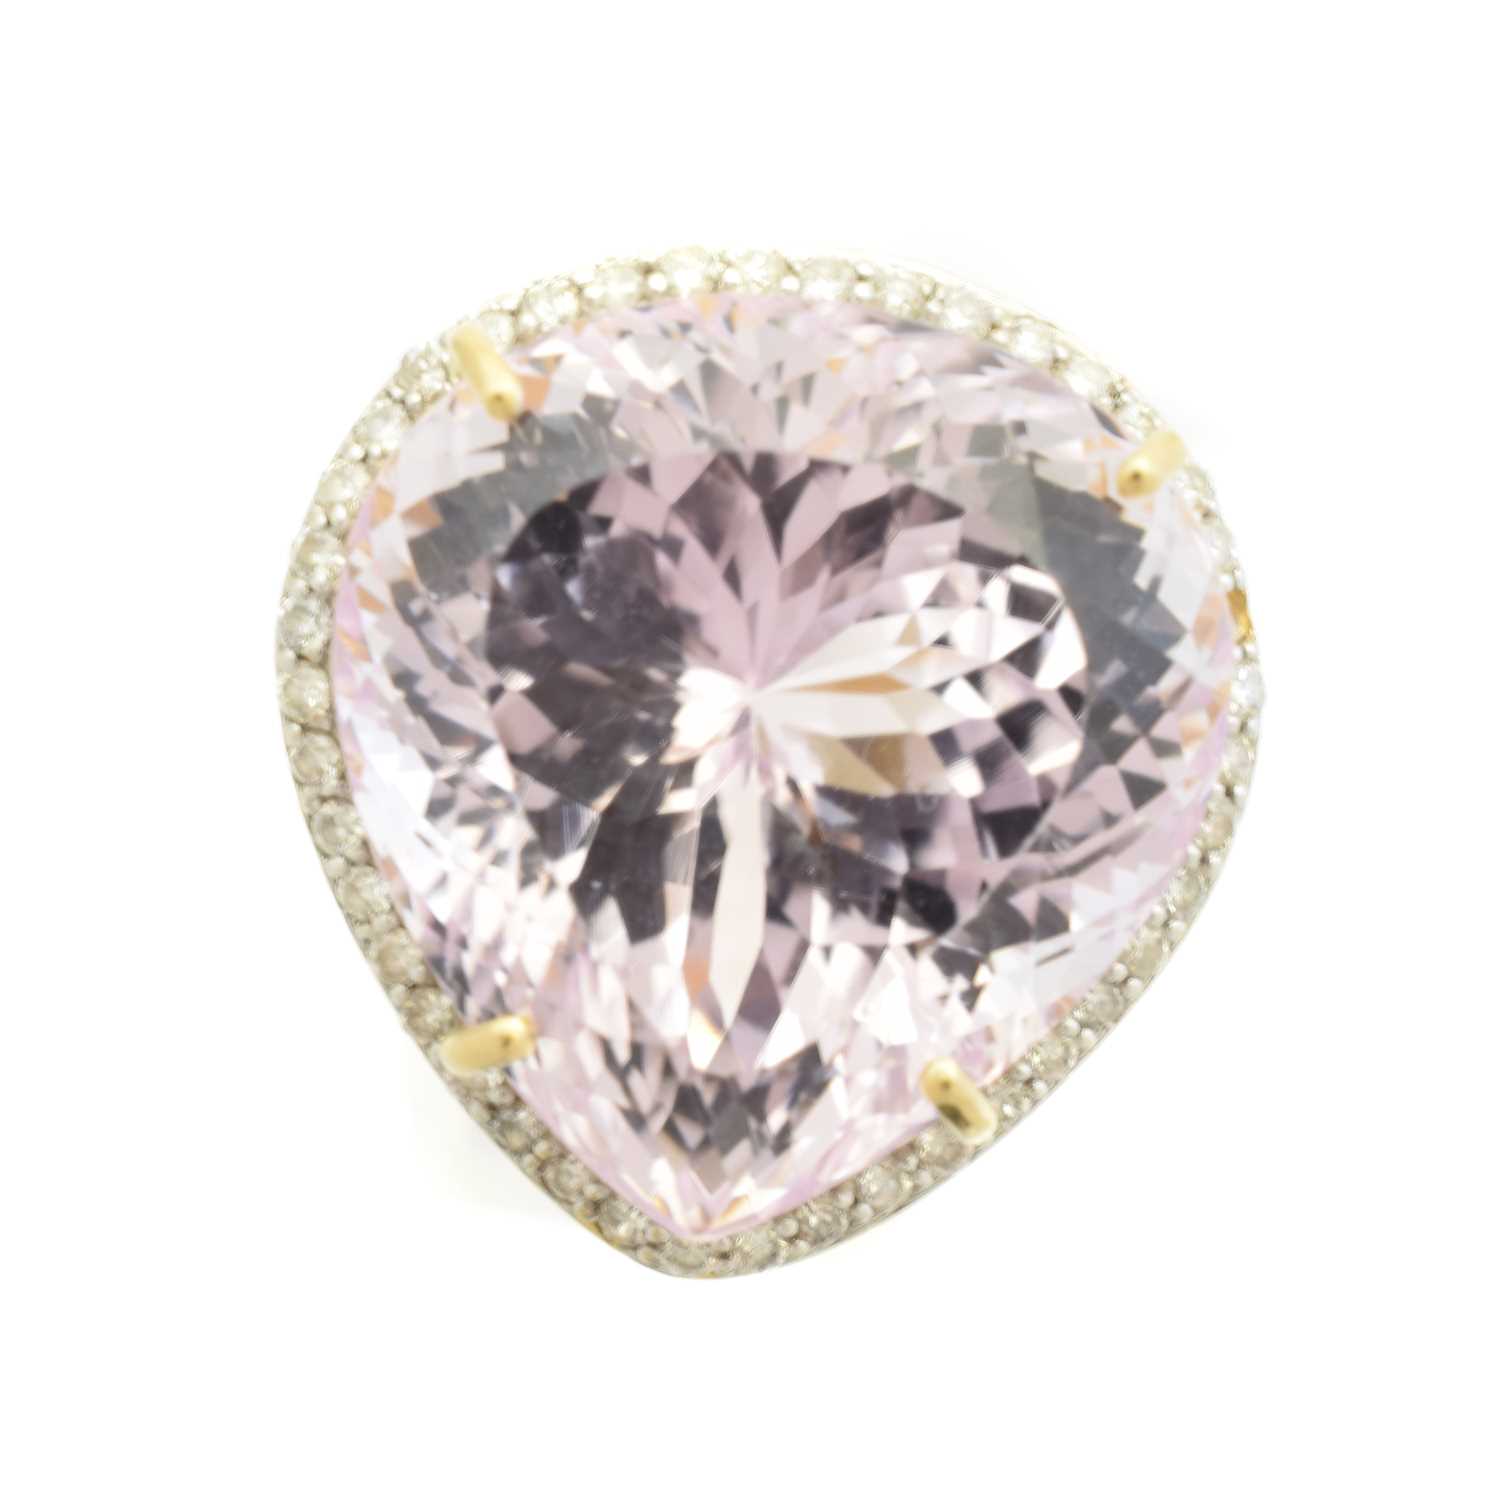 Lot 154 - An 18ct gold kunzite and diamond cluster ring by Lorique